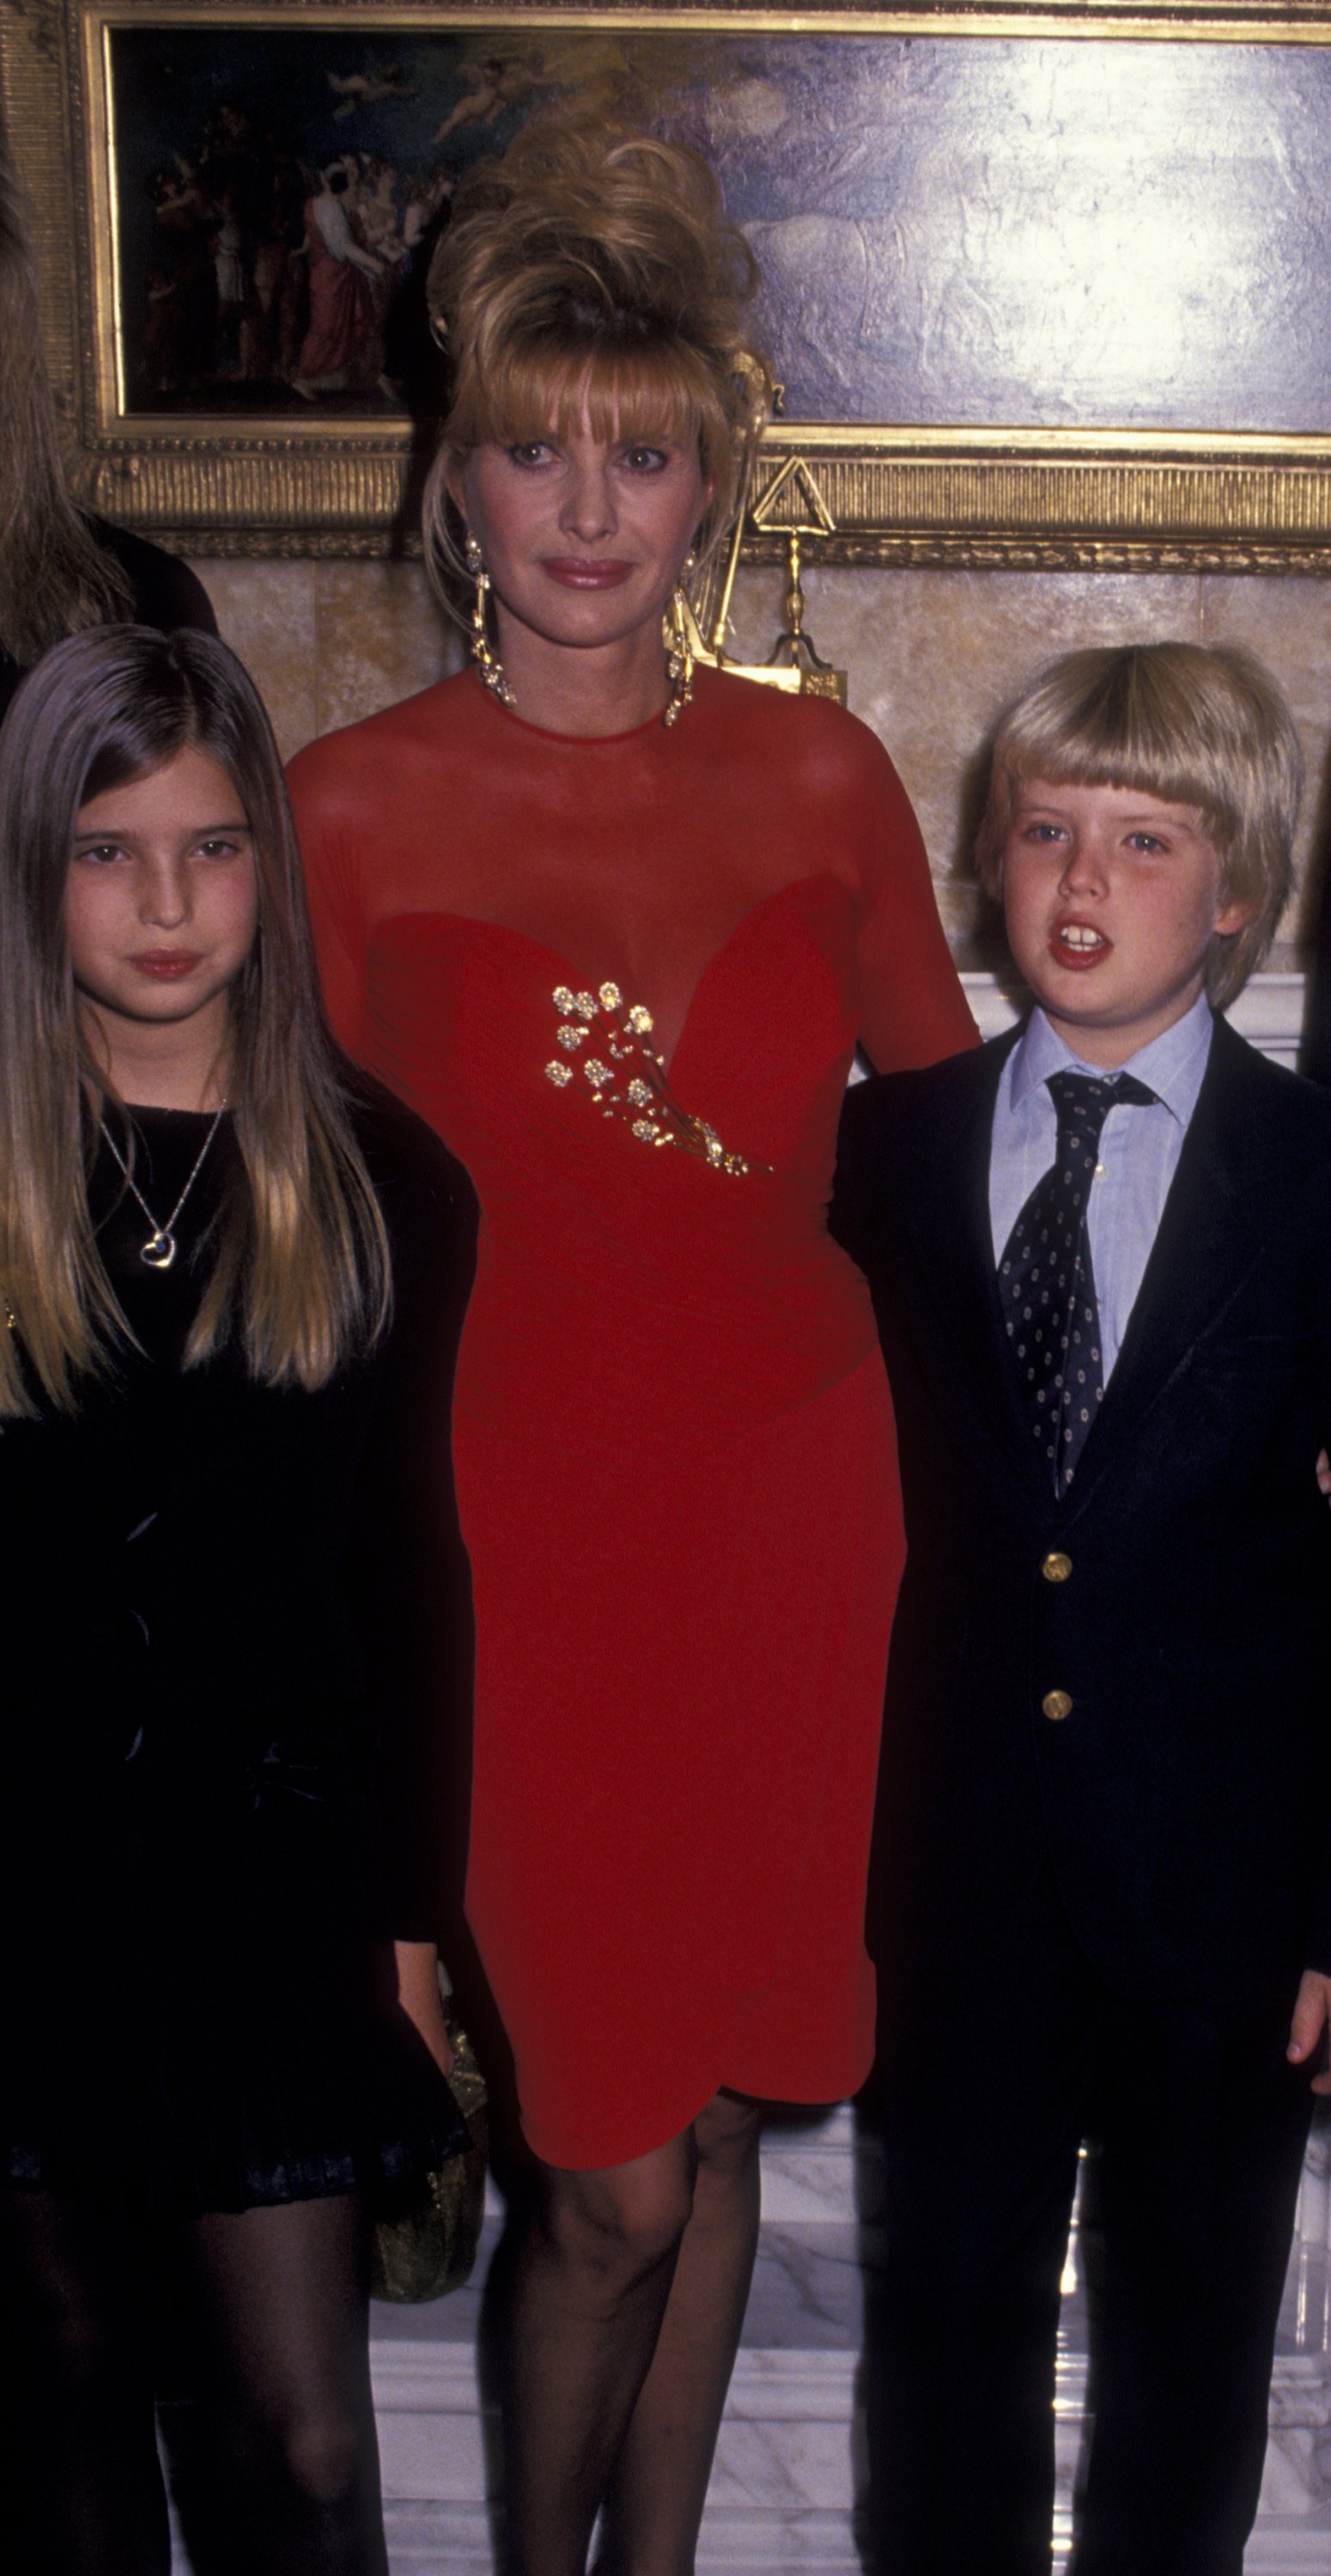  Ivanka Trump, Ivana Trump and Eric Trump attend A Novel Affair Fundraiser Gala on October 25, 1993 at Trump Tower in New York City. | Source: Getty Images